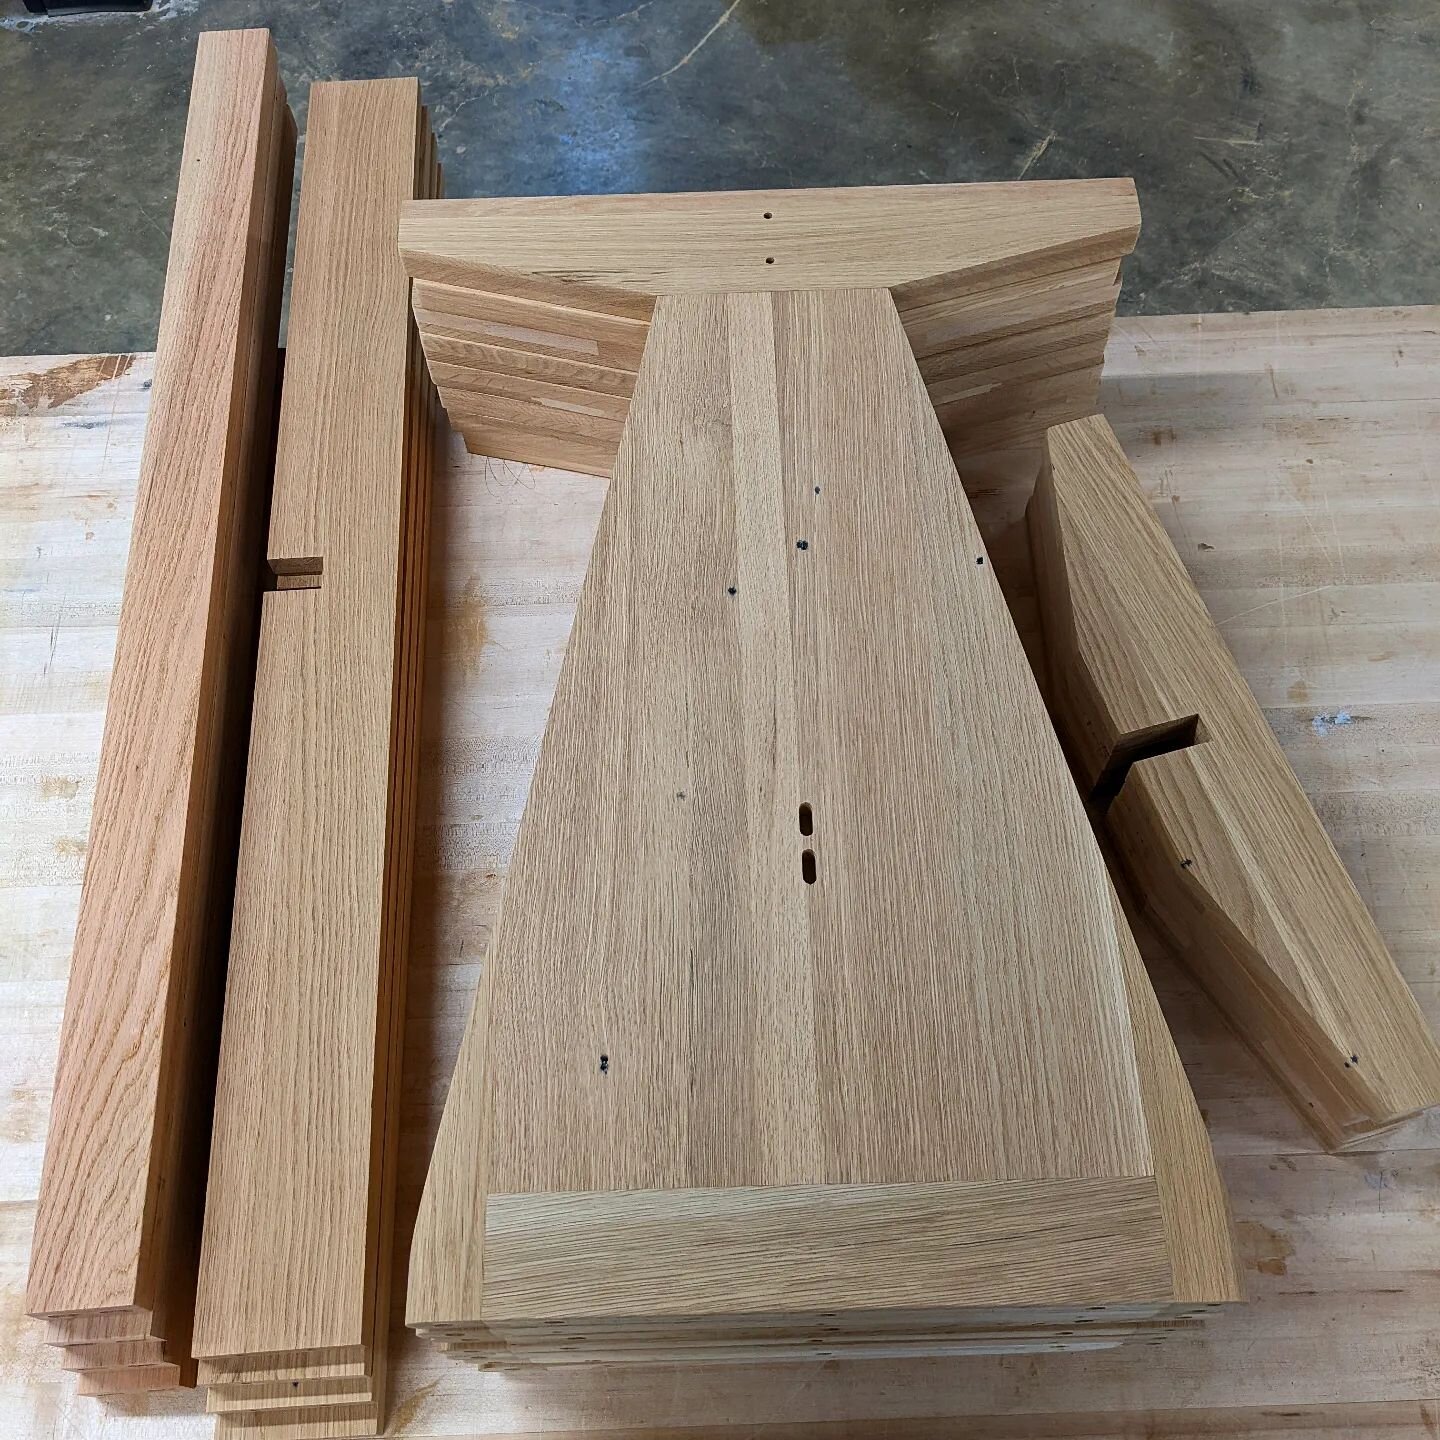 Neat piles of precise work, sanded and resting; what a sight. Seeing your work laid out, the product of many hours of labor, is its own satisfaction. Before the stress of assembly and the final pains of finishing, it's like a breath of pause to refle